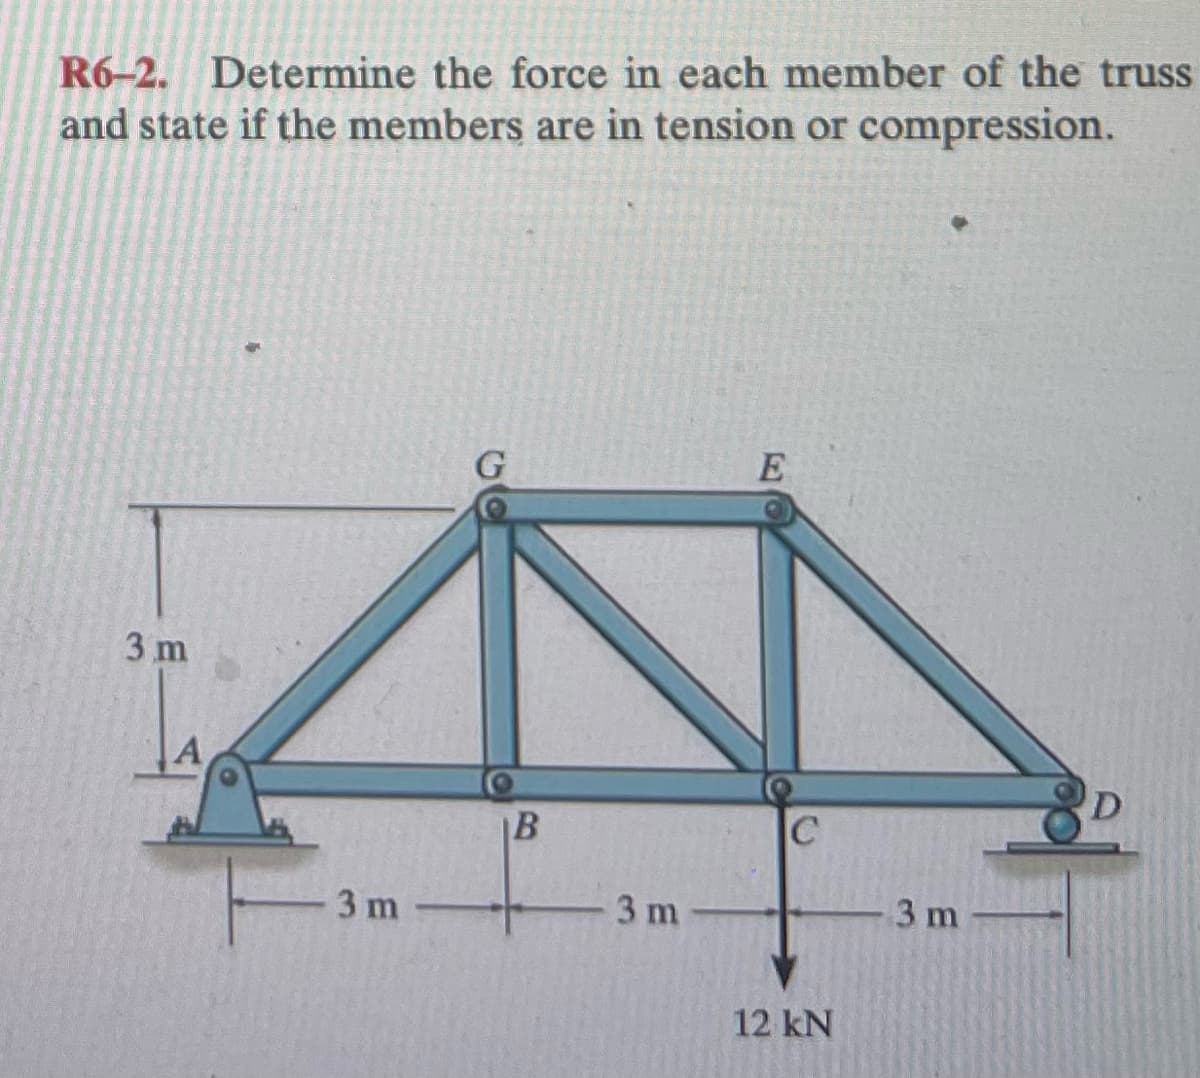 R6-2. Determine the force in each member of the truss
and state if the members are in tension or compression.
3 m
A
6
3 m-
G
B
3 m
E
C
12 kN
3 m
D